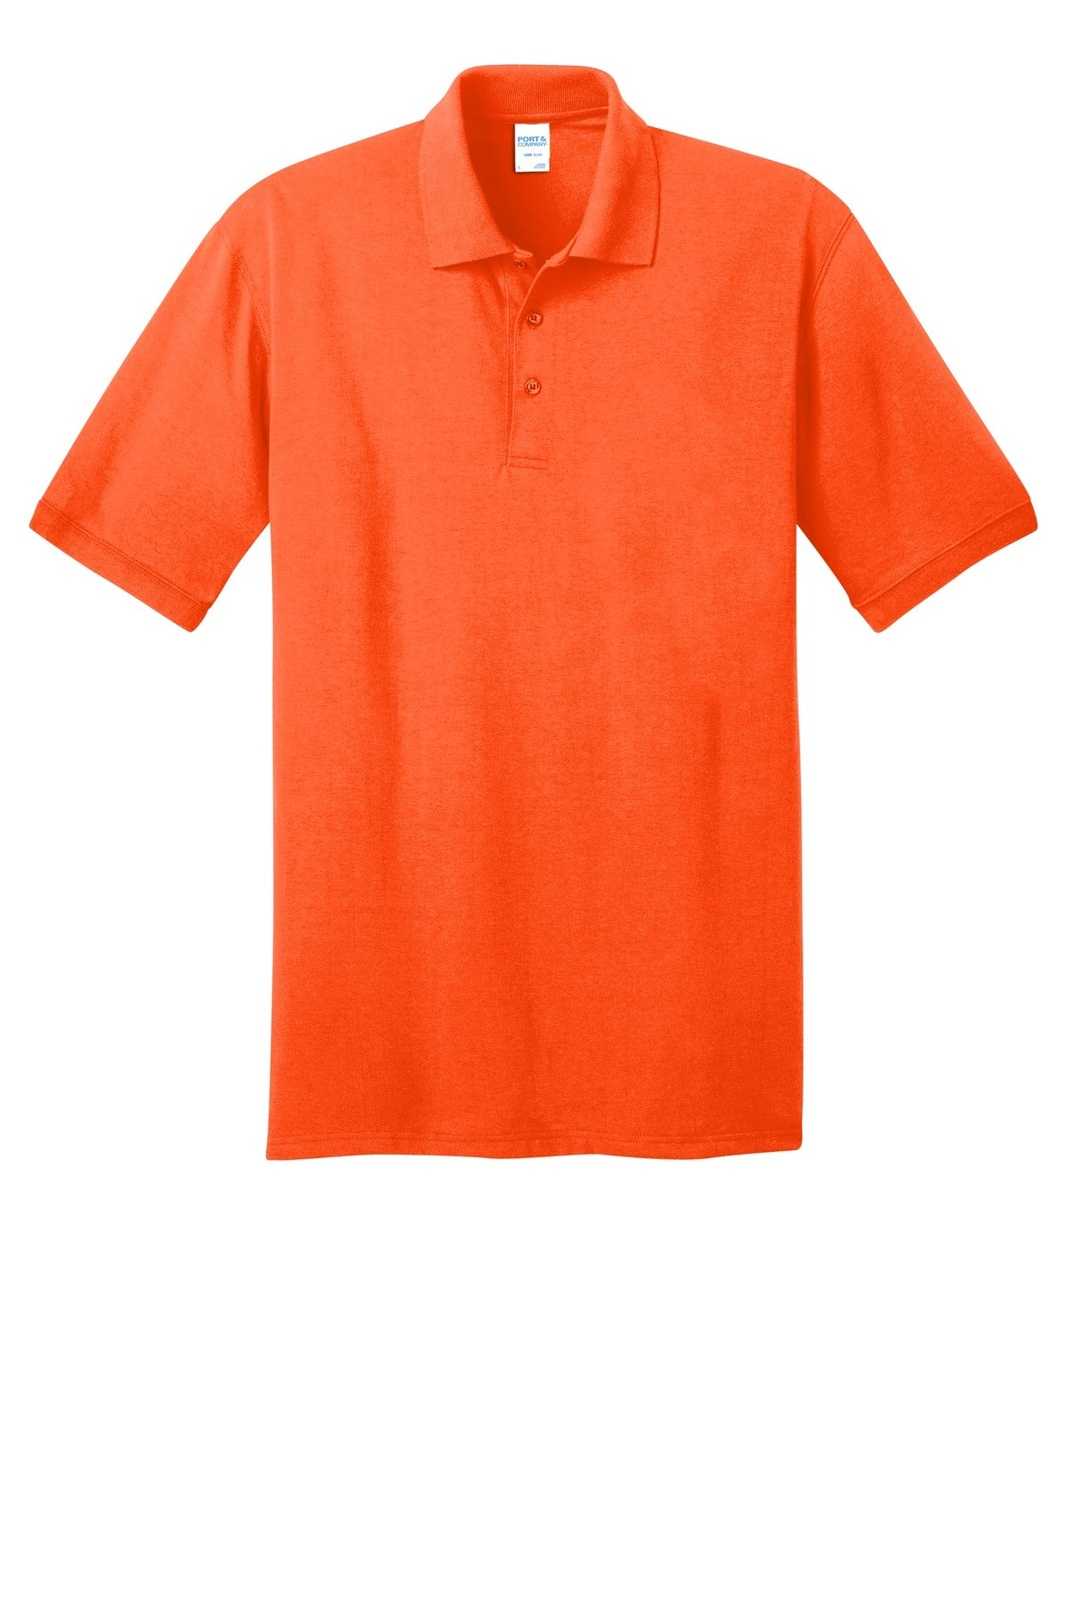 Port &amp; Company KP55T Tall Core Blend Jersey Knit Polo - Safety Orange - HIT a Double - 2